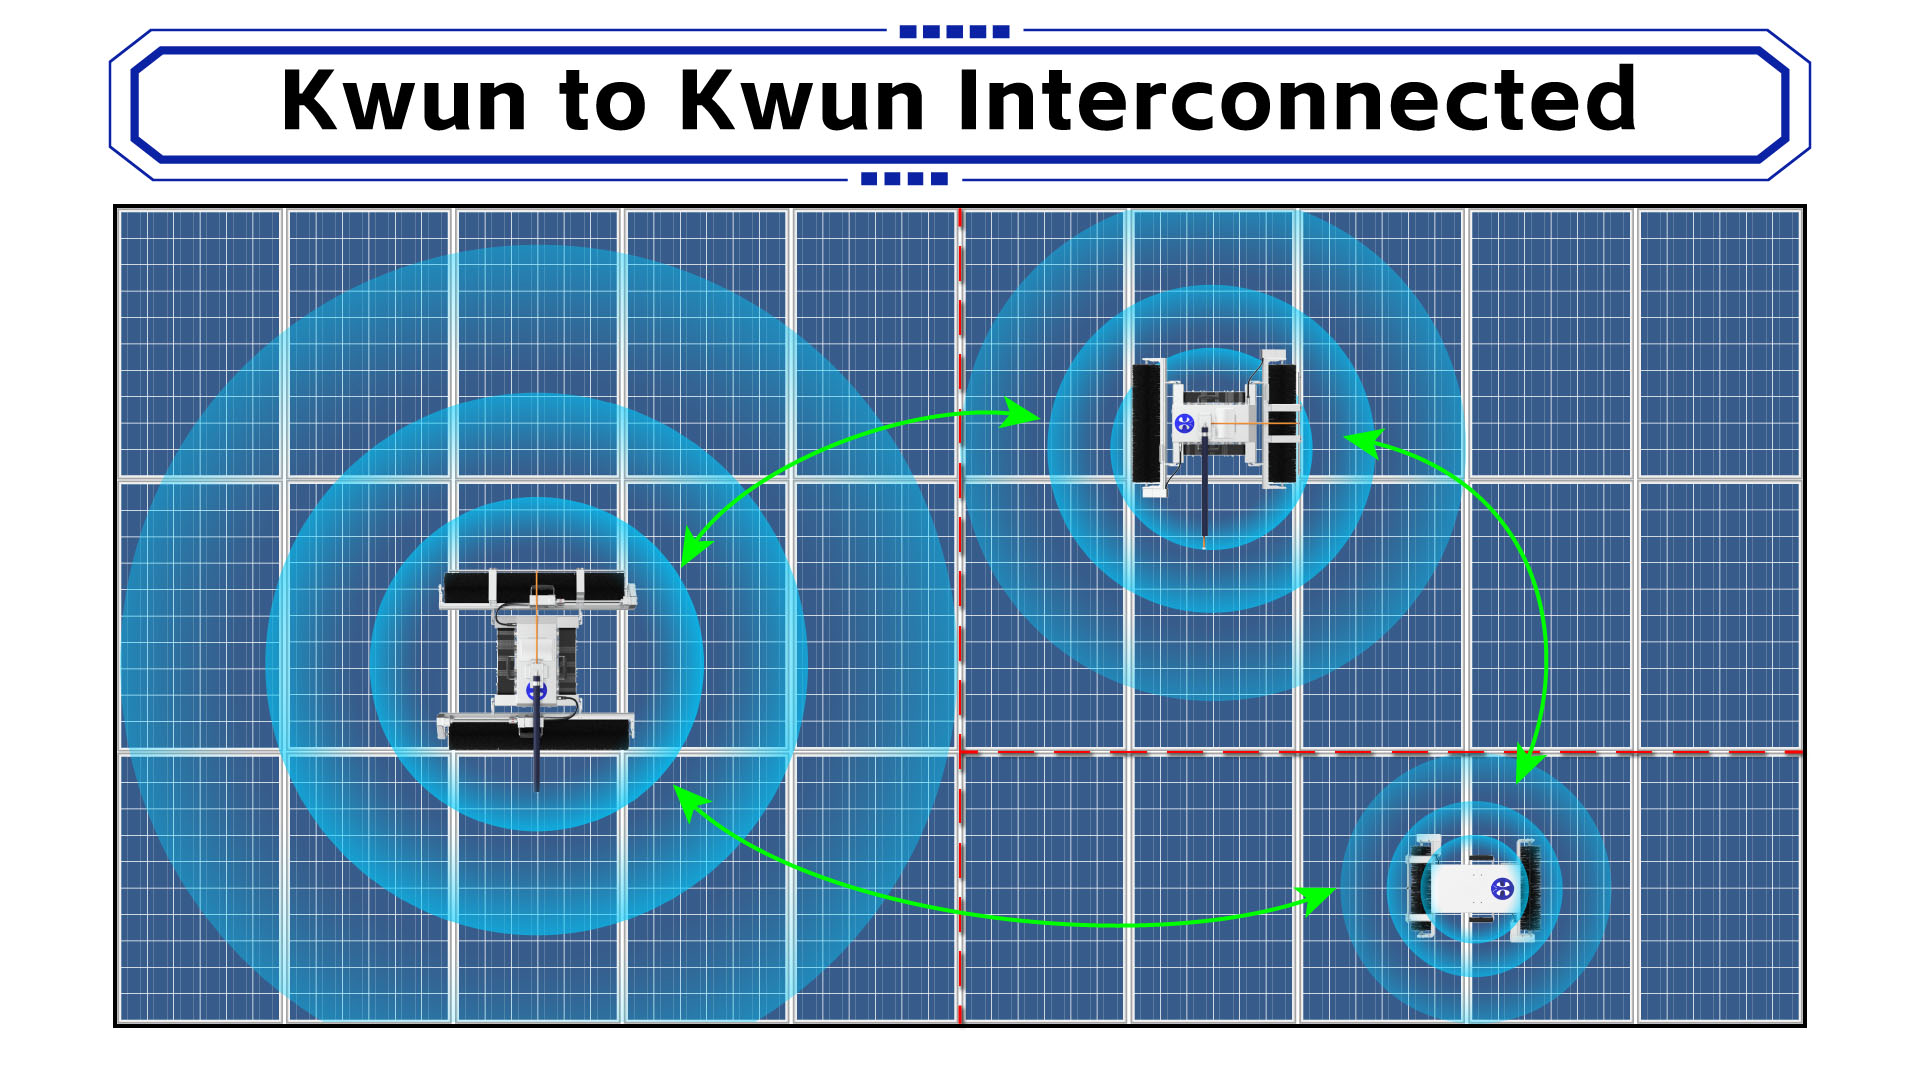 Kwun Extended Function - Kwun to Kwun Interconnected